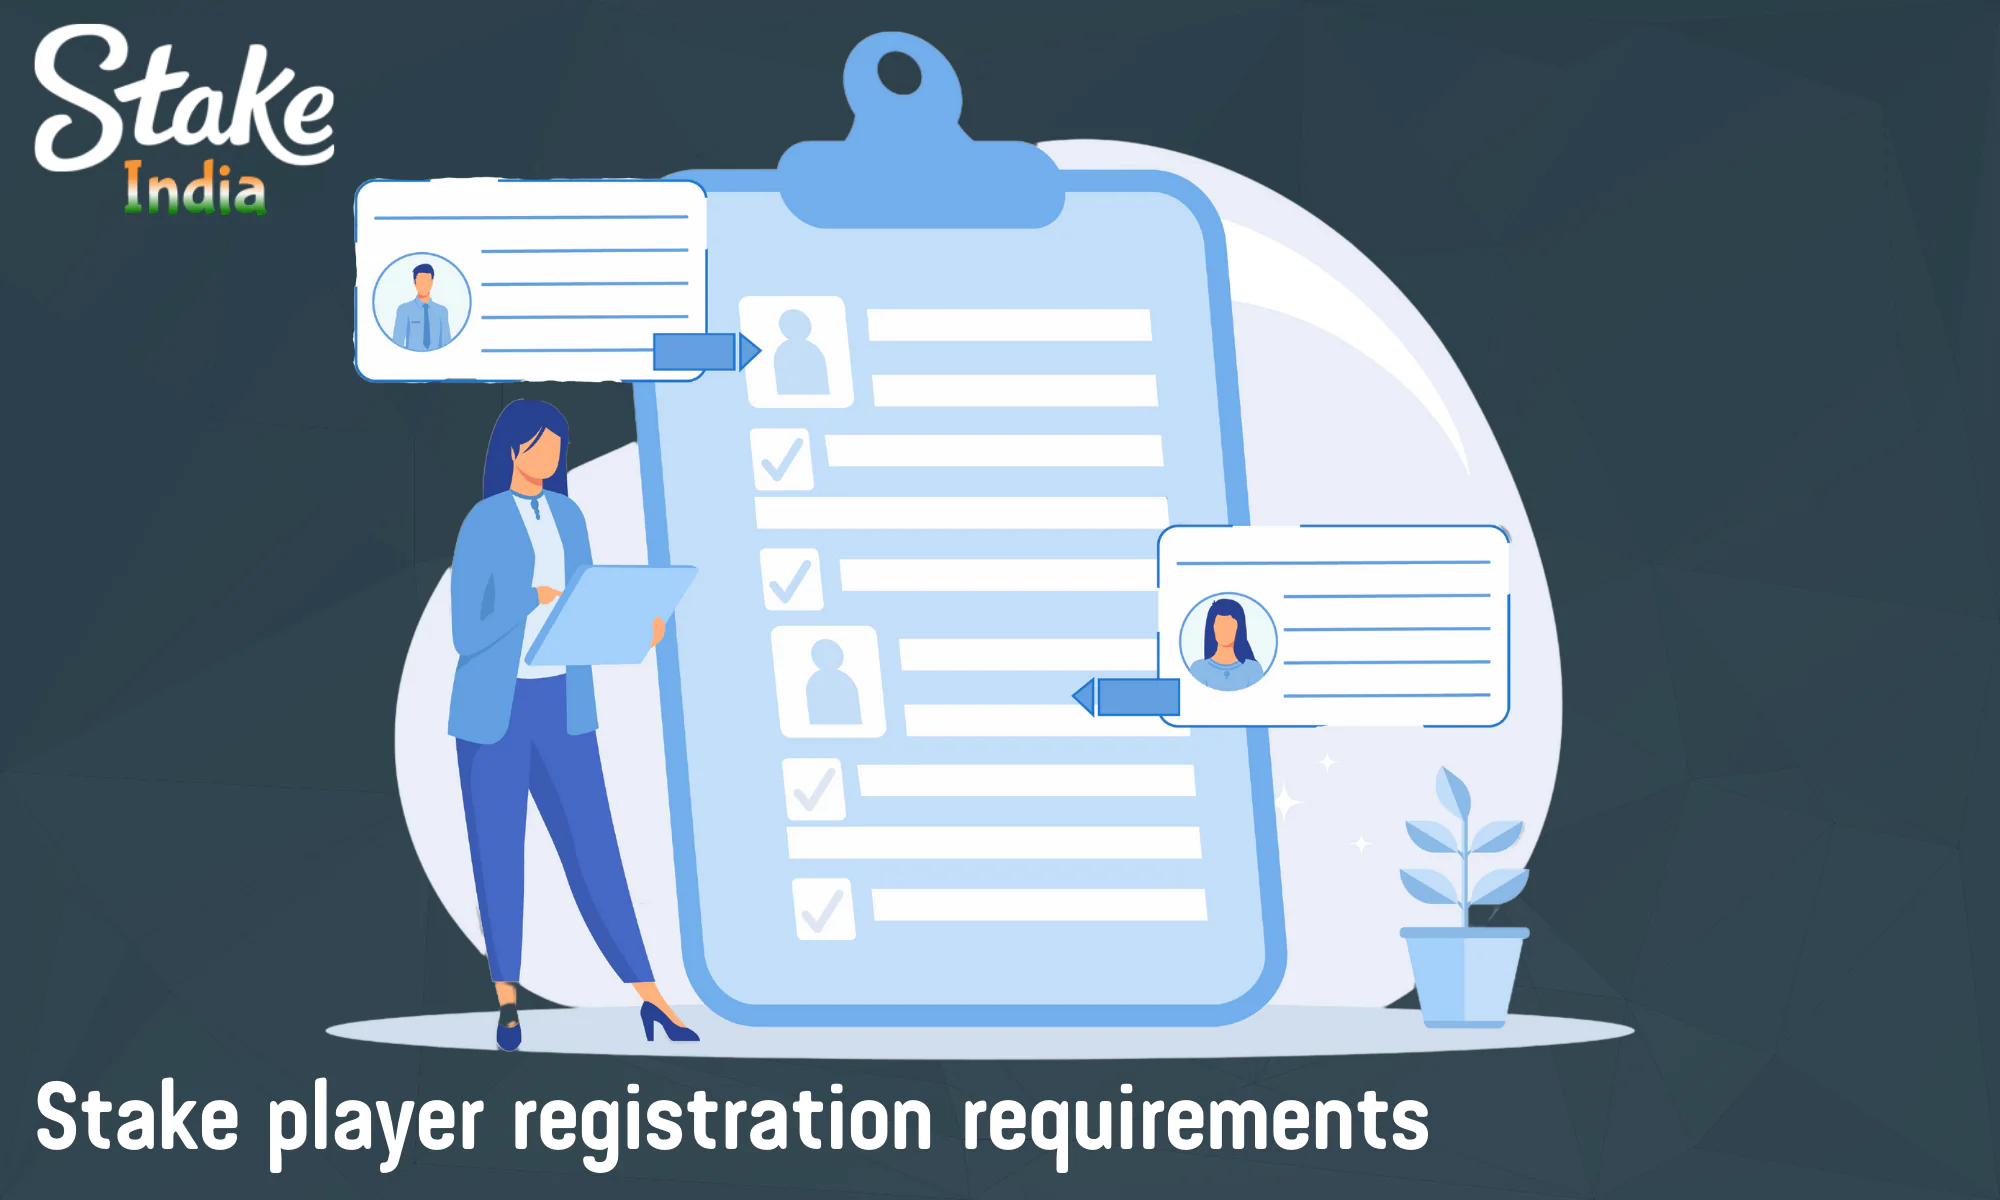 List of basic conditions for successful account registration in Stake